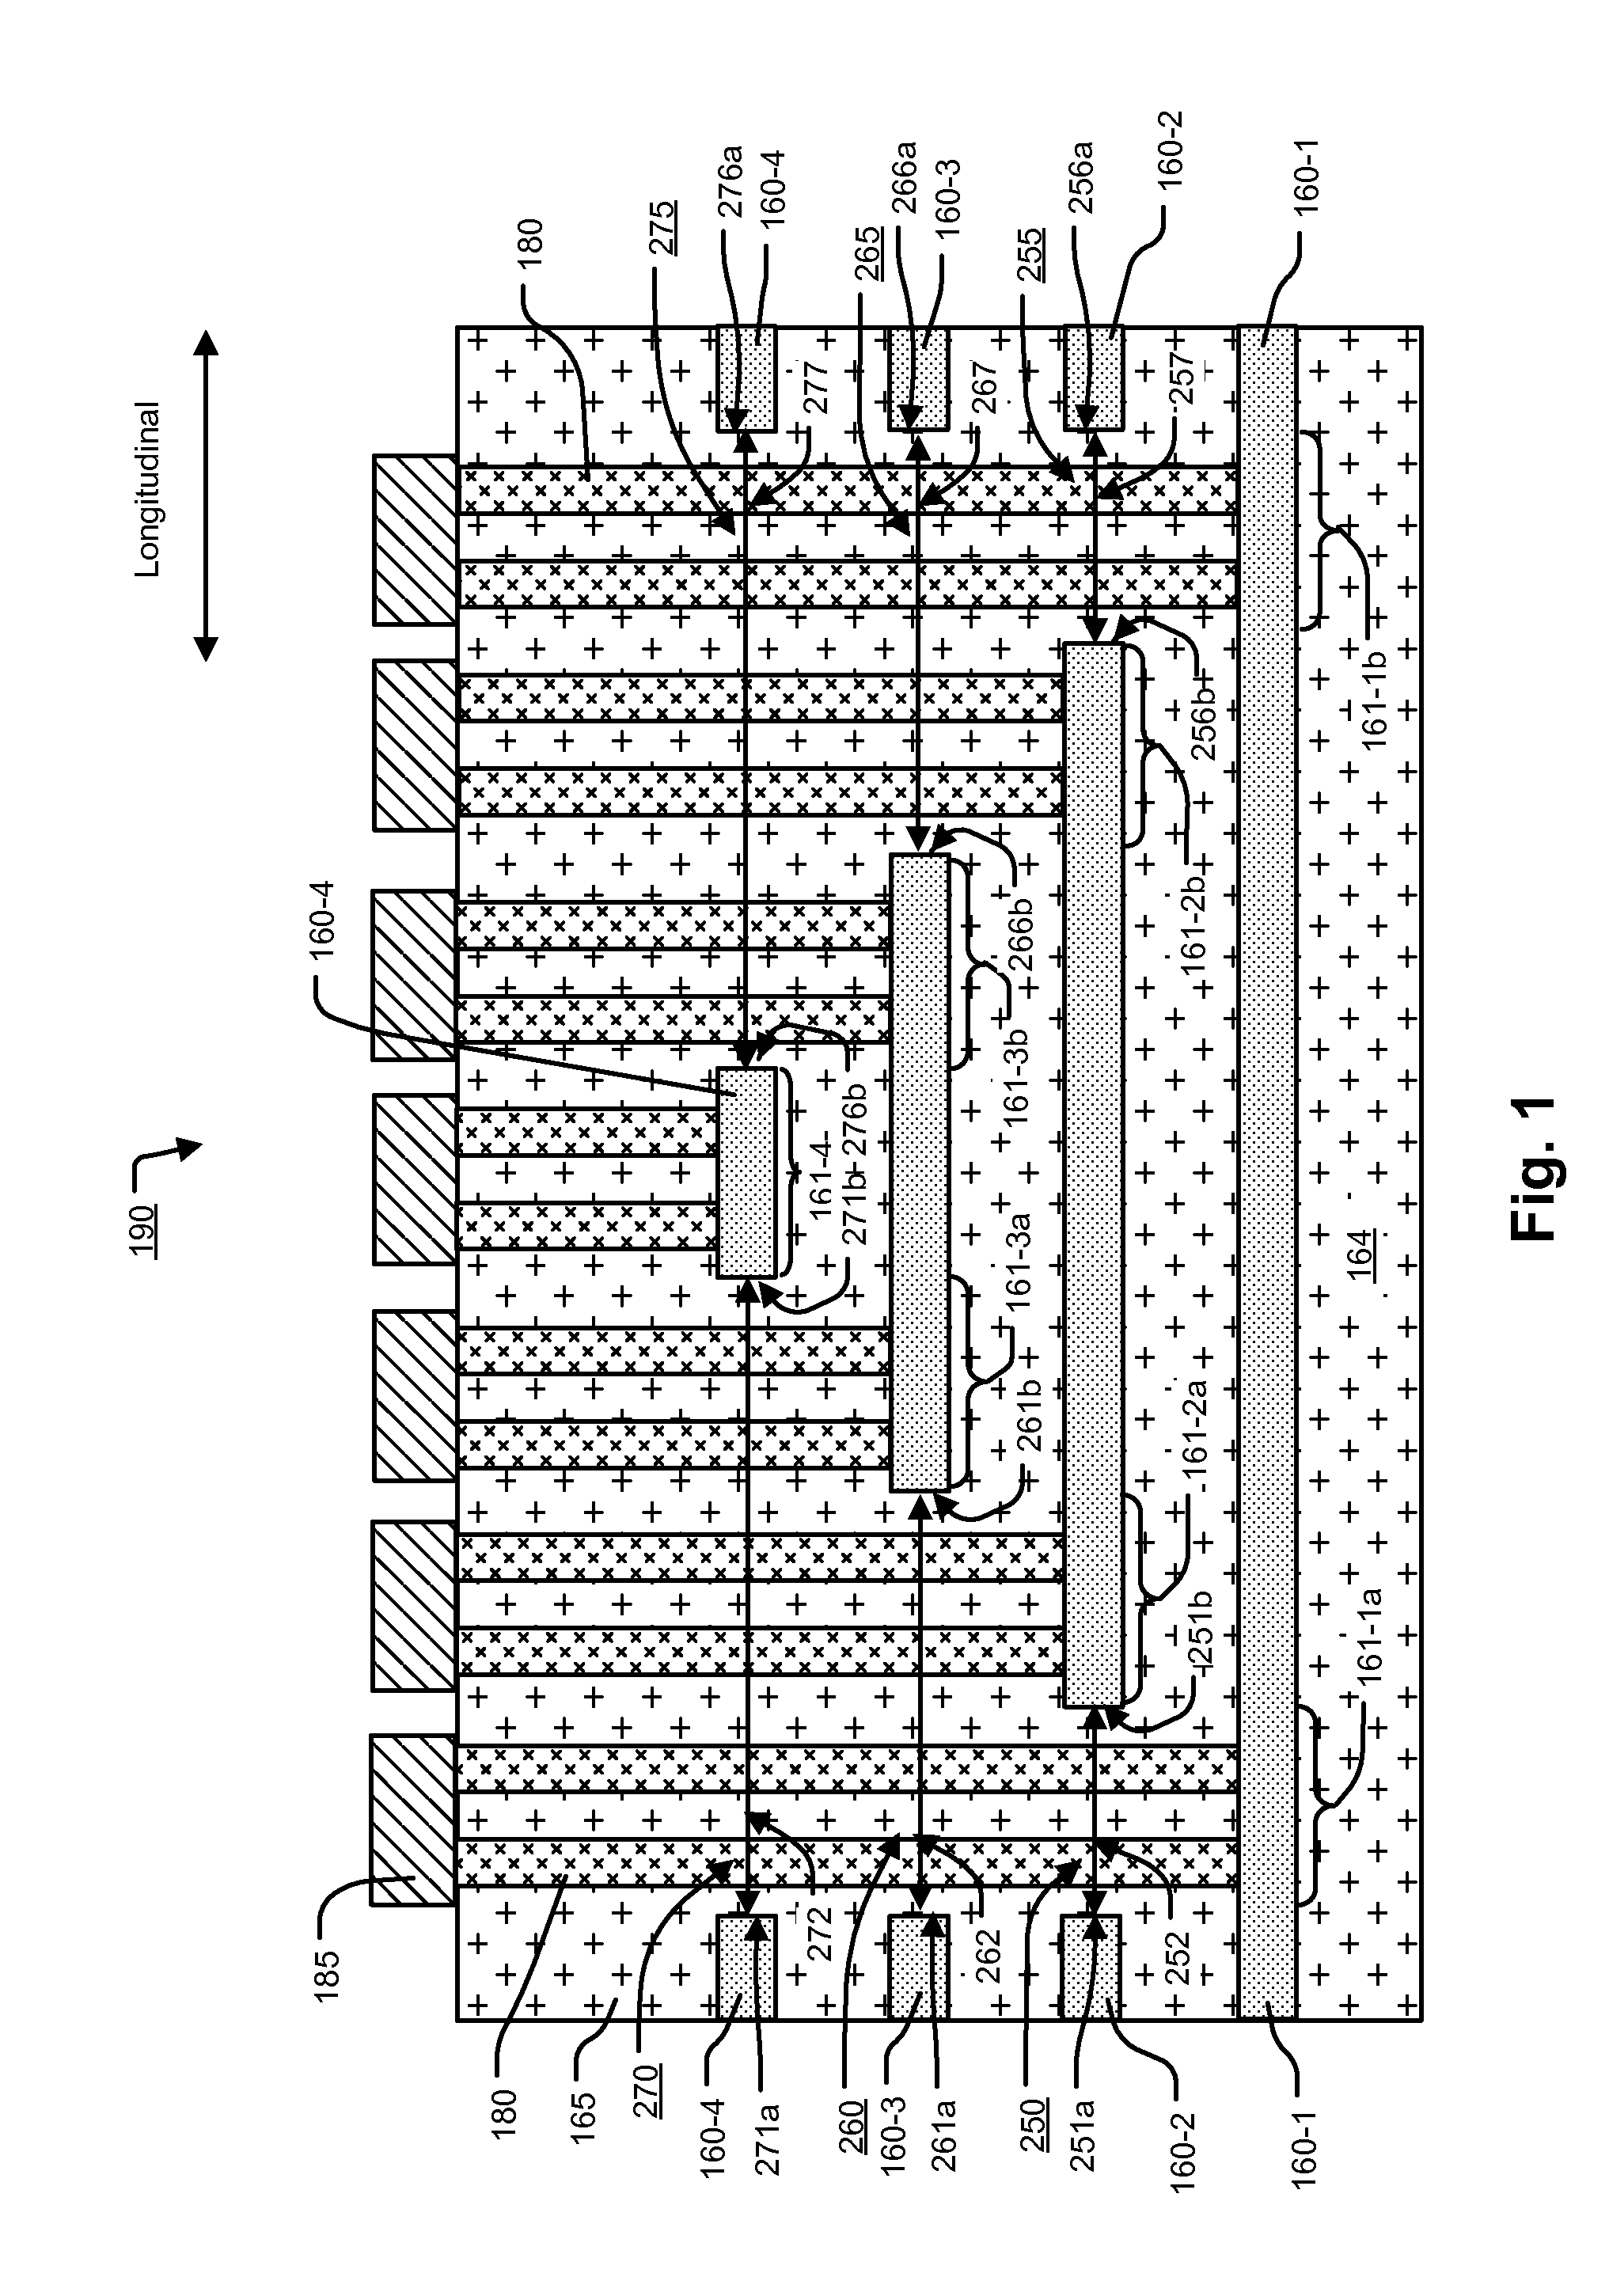 Reduced number of masks for IC device with stacked contact levels